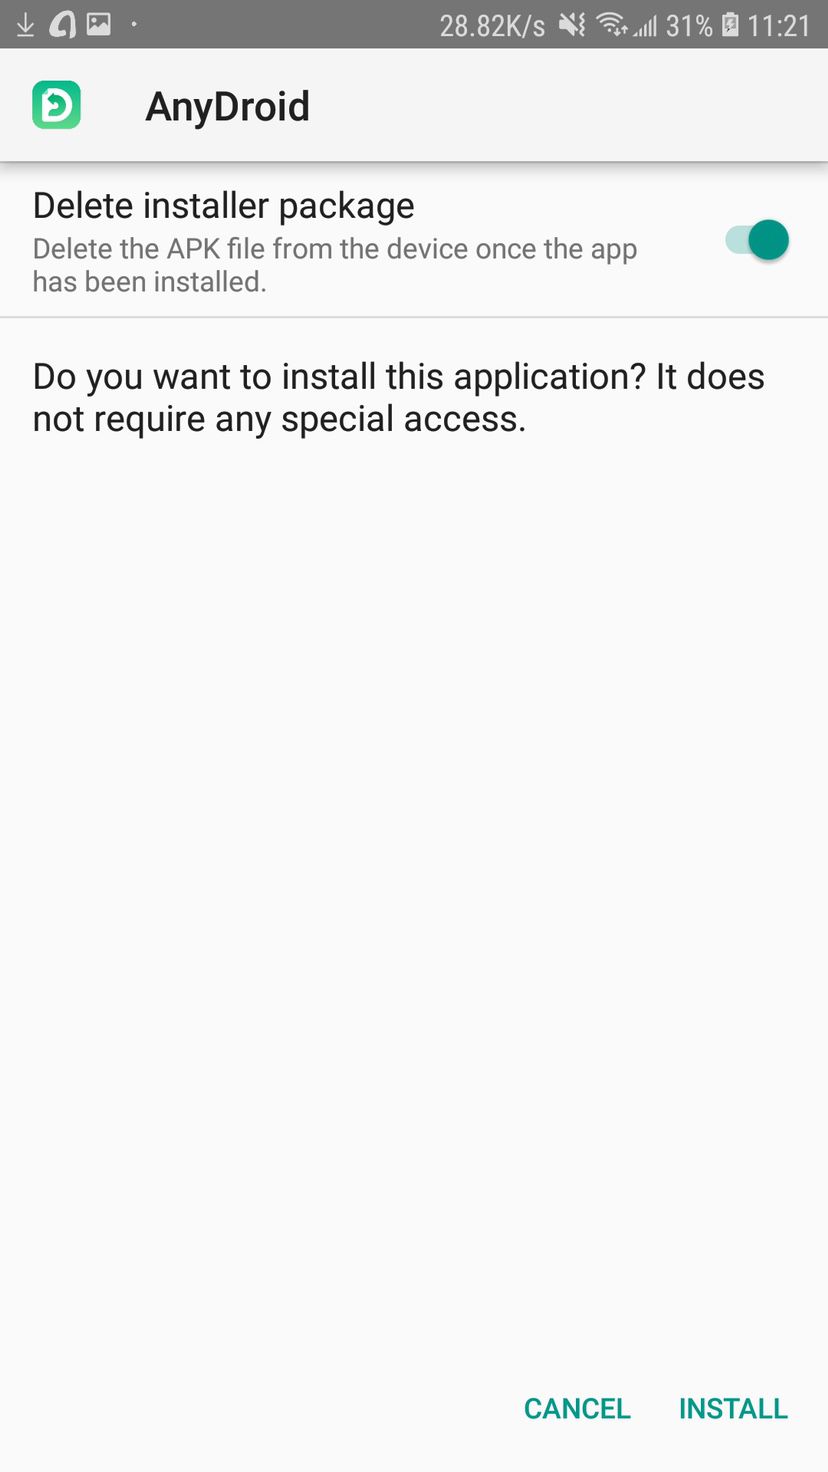 instal the new for apple AnyDroid 7.5.0.20230626